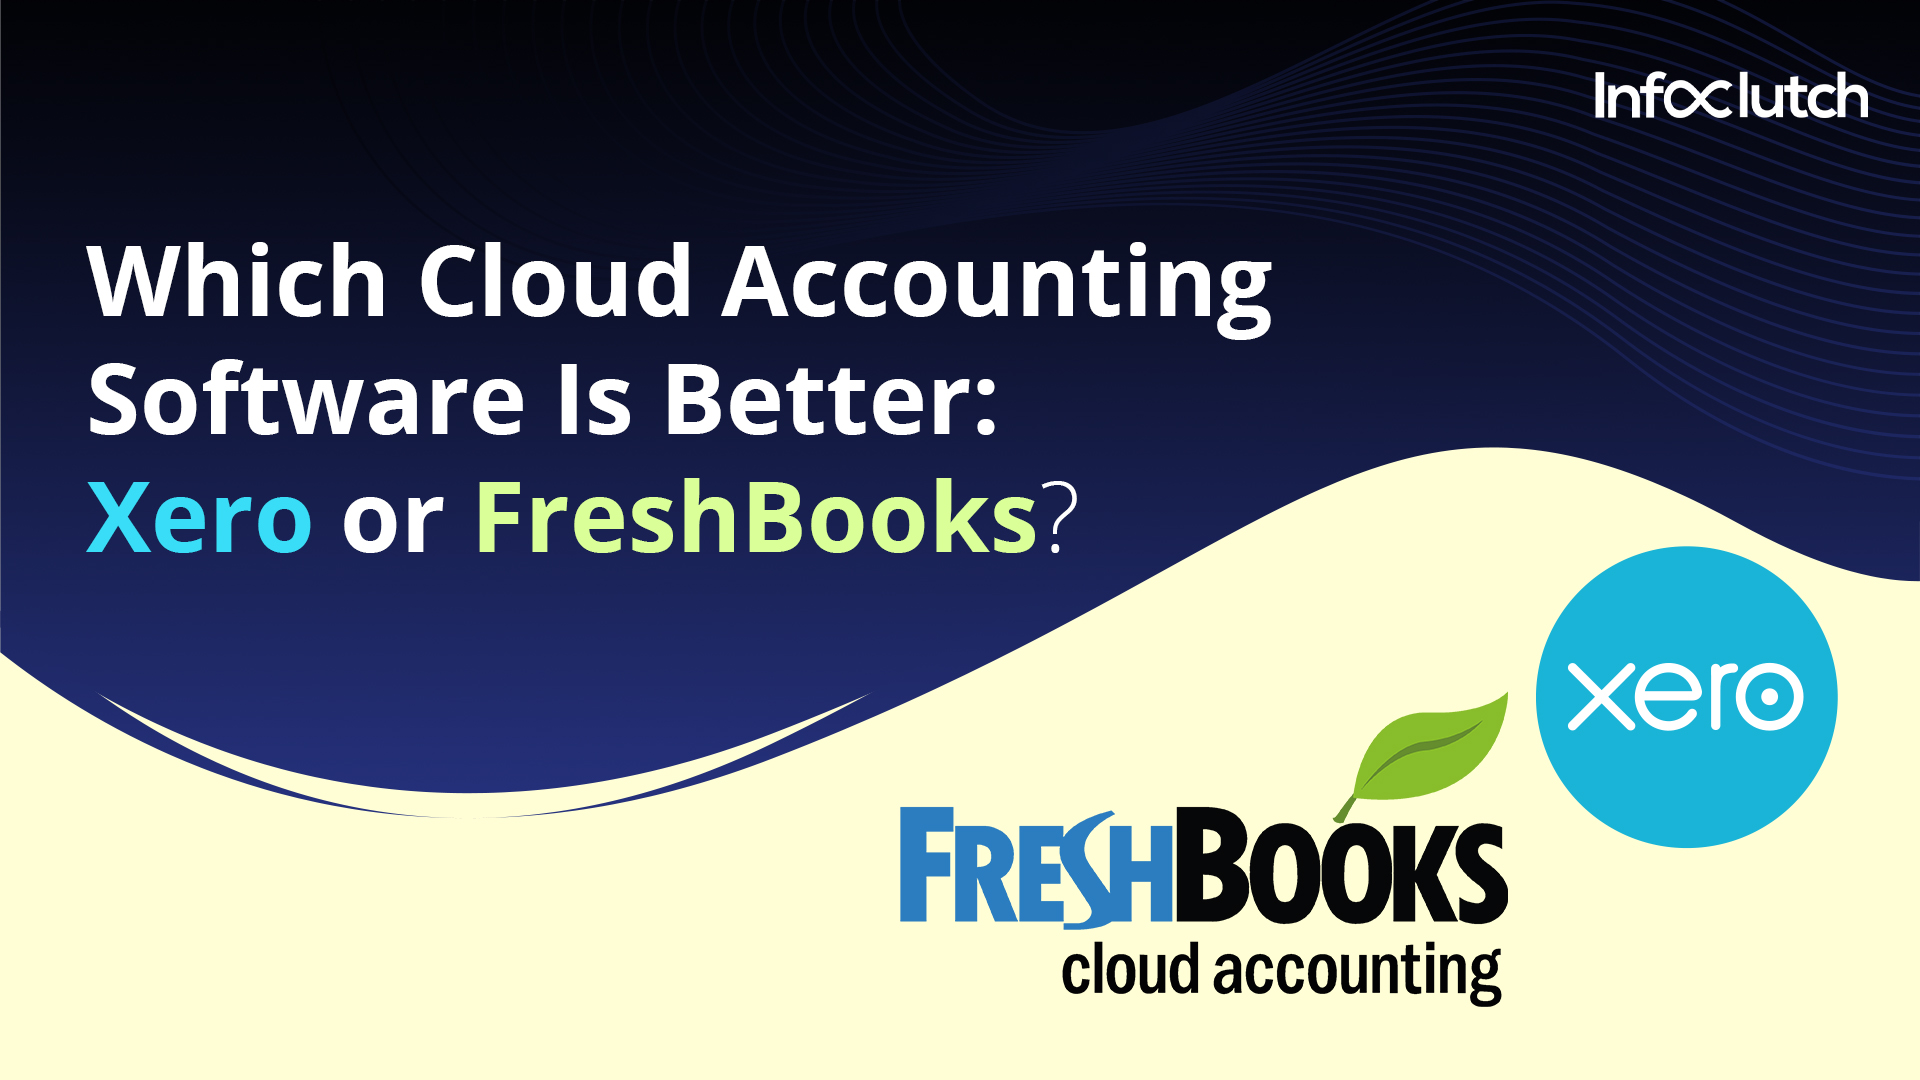 Which Cloud Accounting Software Is Better: Xero or FreshBooks